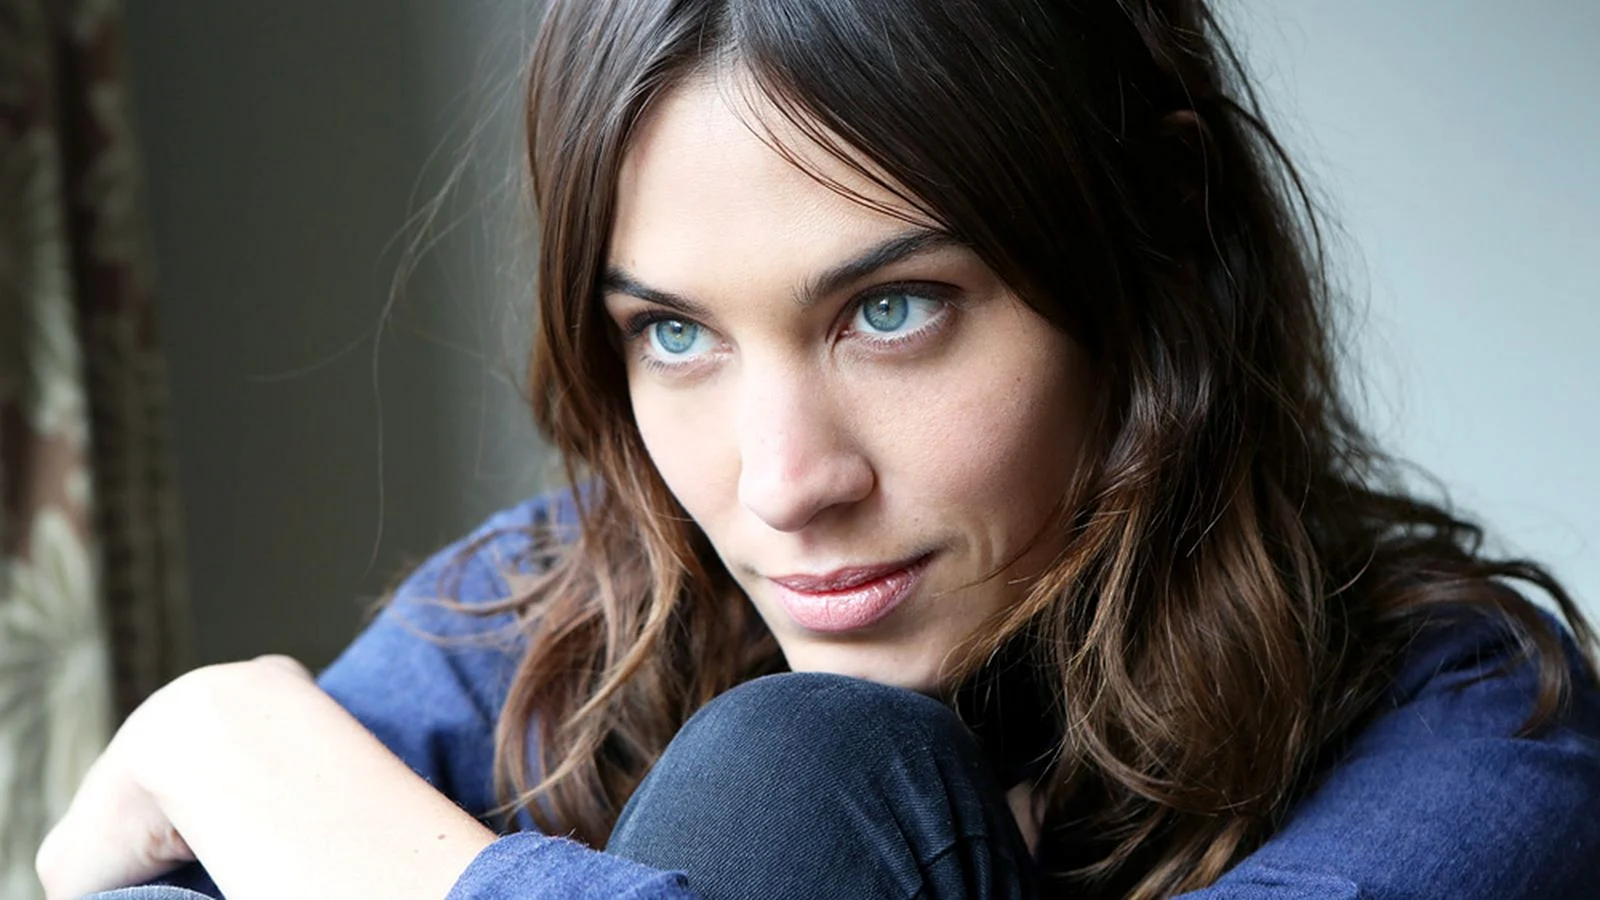 34 Alexa Chung Best Photos, Images & High-Res Pictures | WebRelax